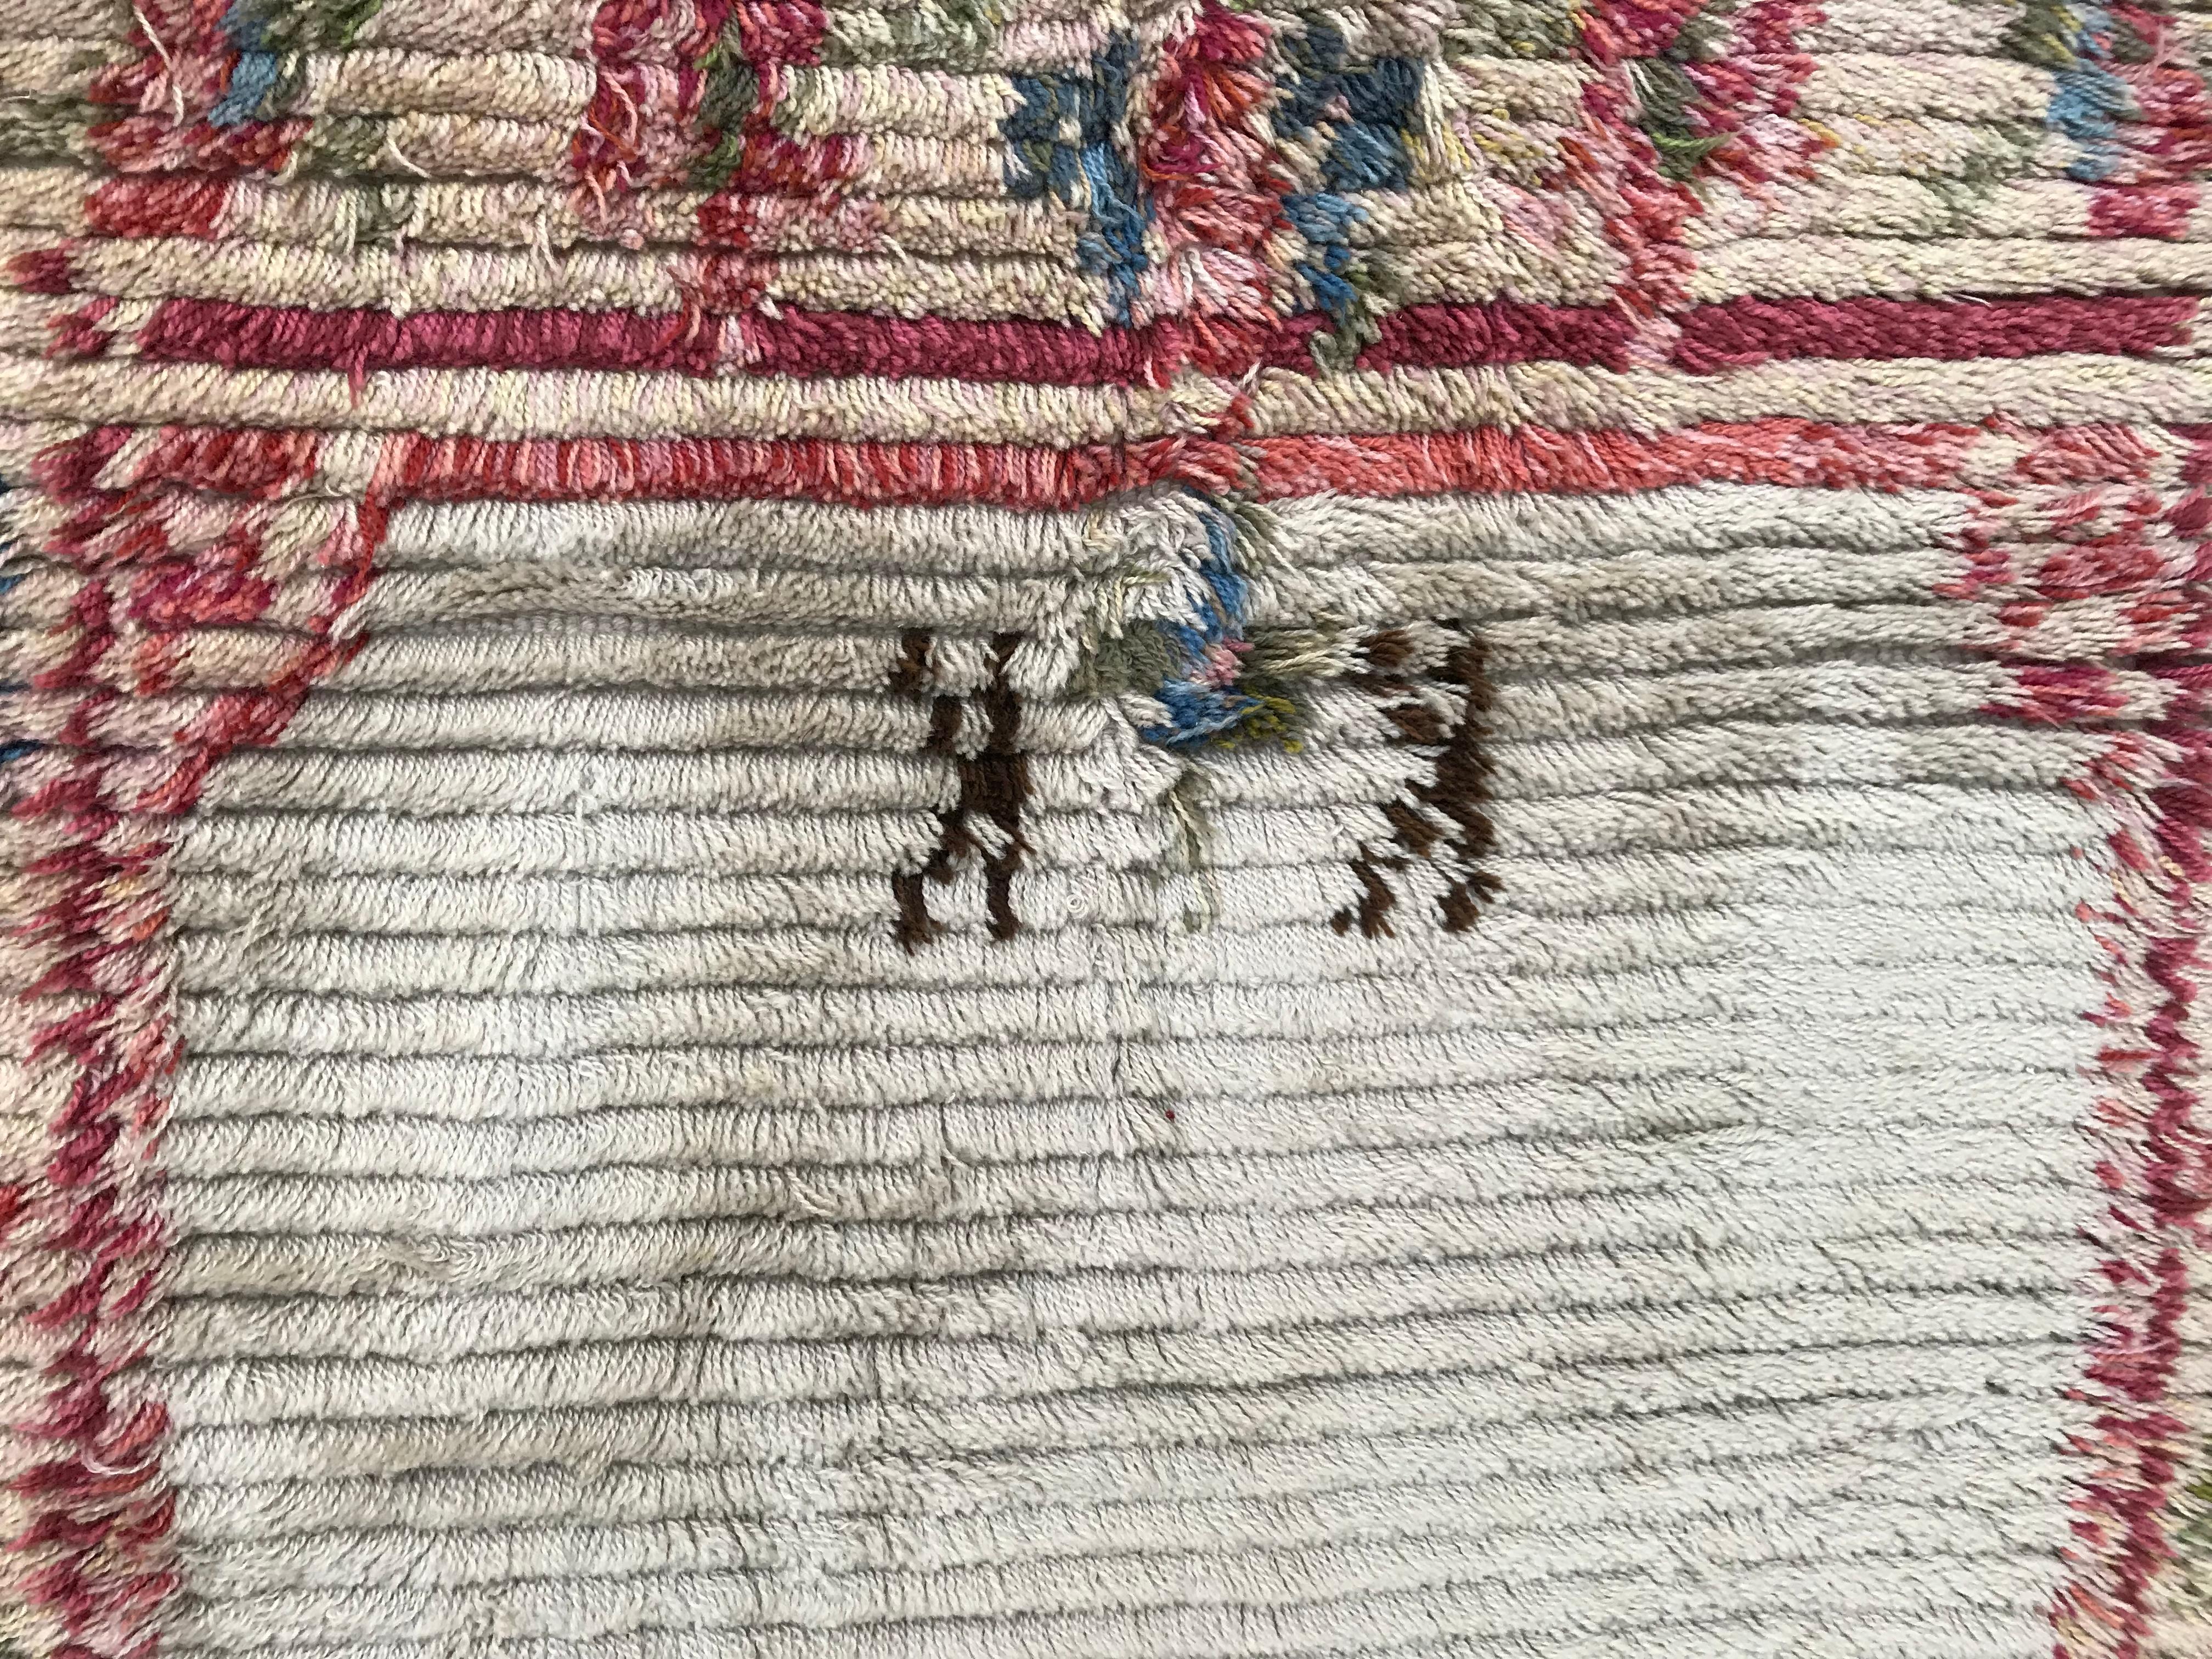 Extraordinary mid-20th-century Scandinavian runner, boasting a design reminiscent of 18th-century tapestries. Hand-knotted with wool velvet on a cotton foundation, this piece is in impeccable condition. Versatile as both a soft rug and a captivating